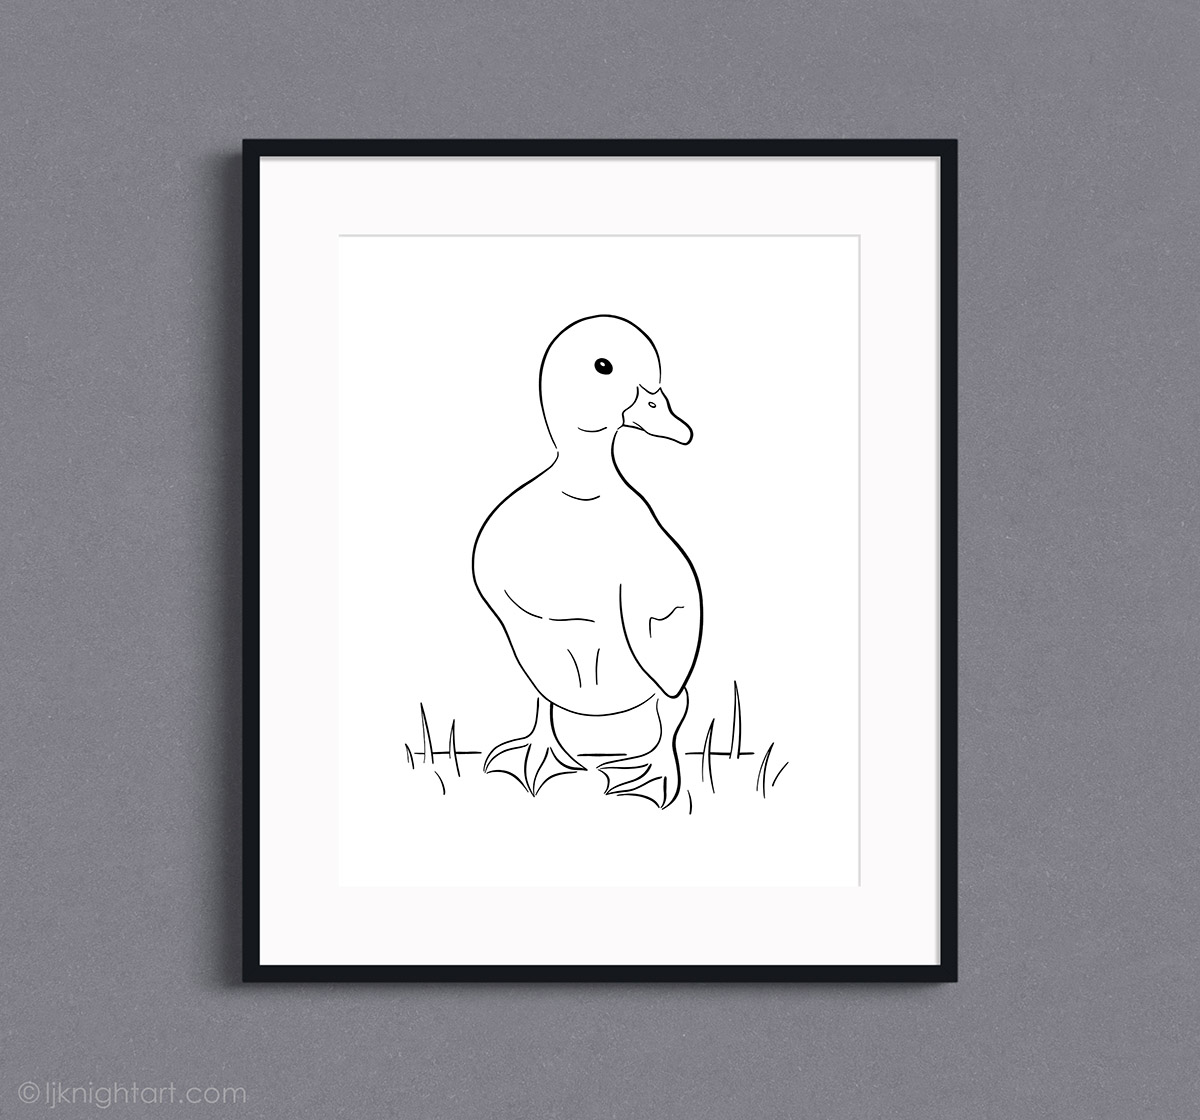 Black and white line drawing of a duckling - contemporary bird art by L.J. Knight